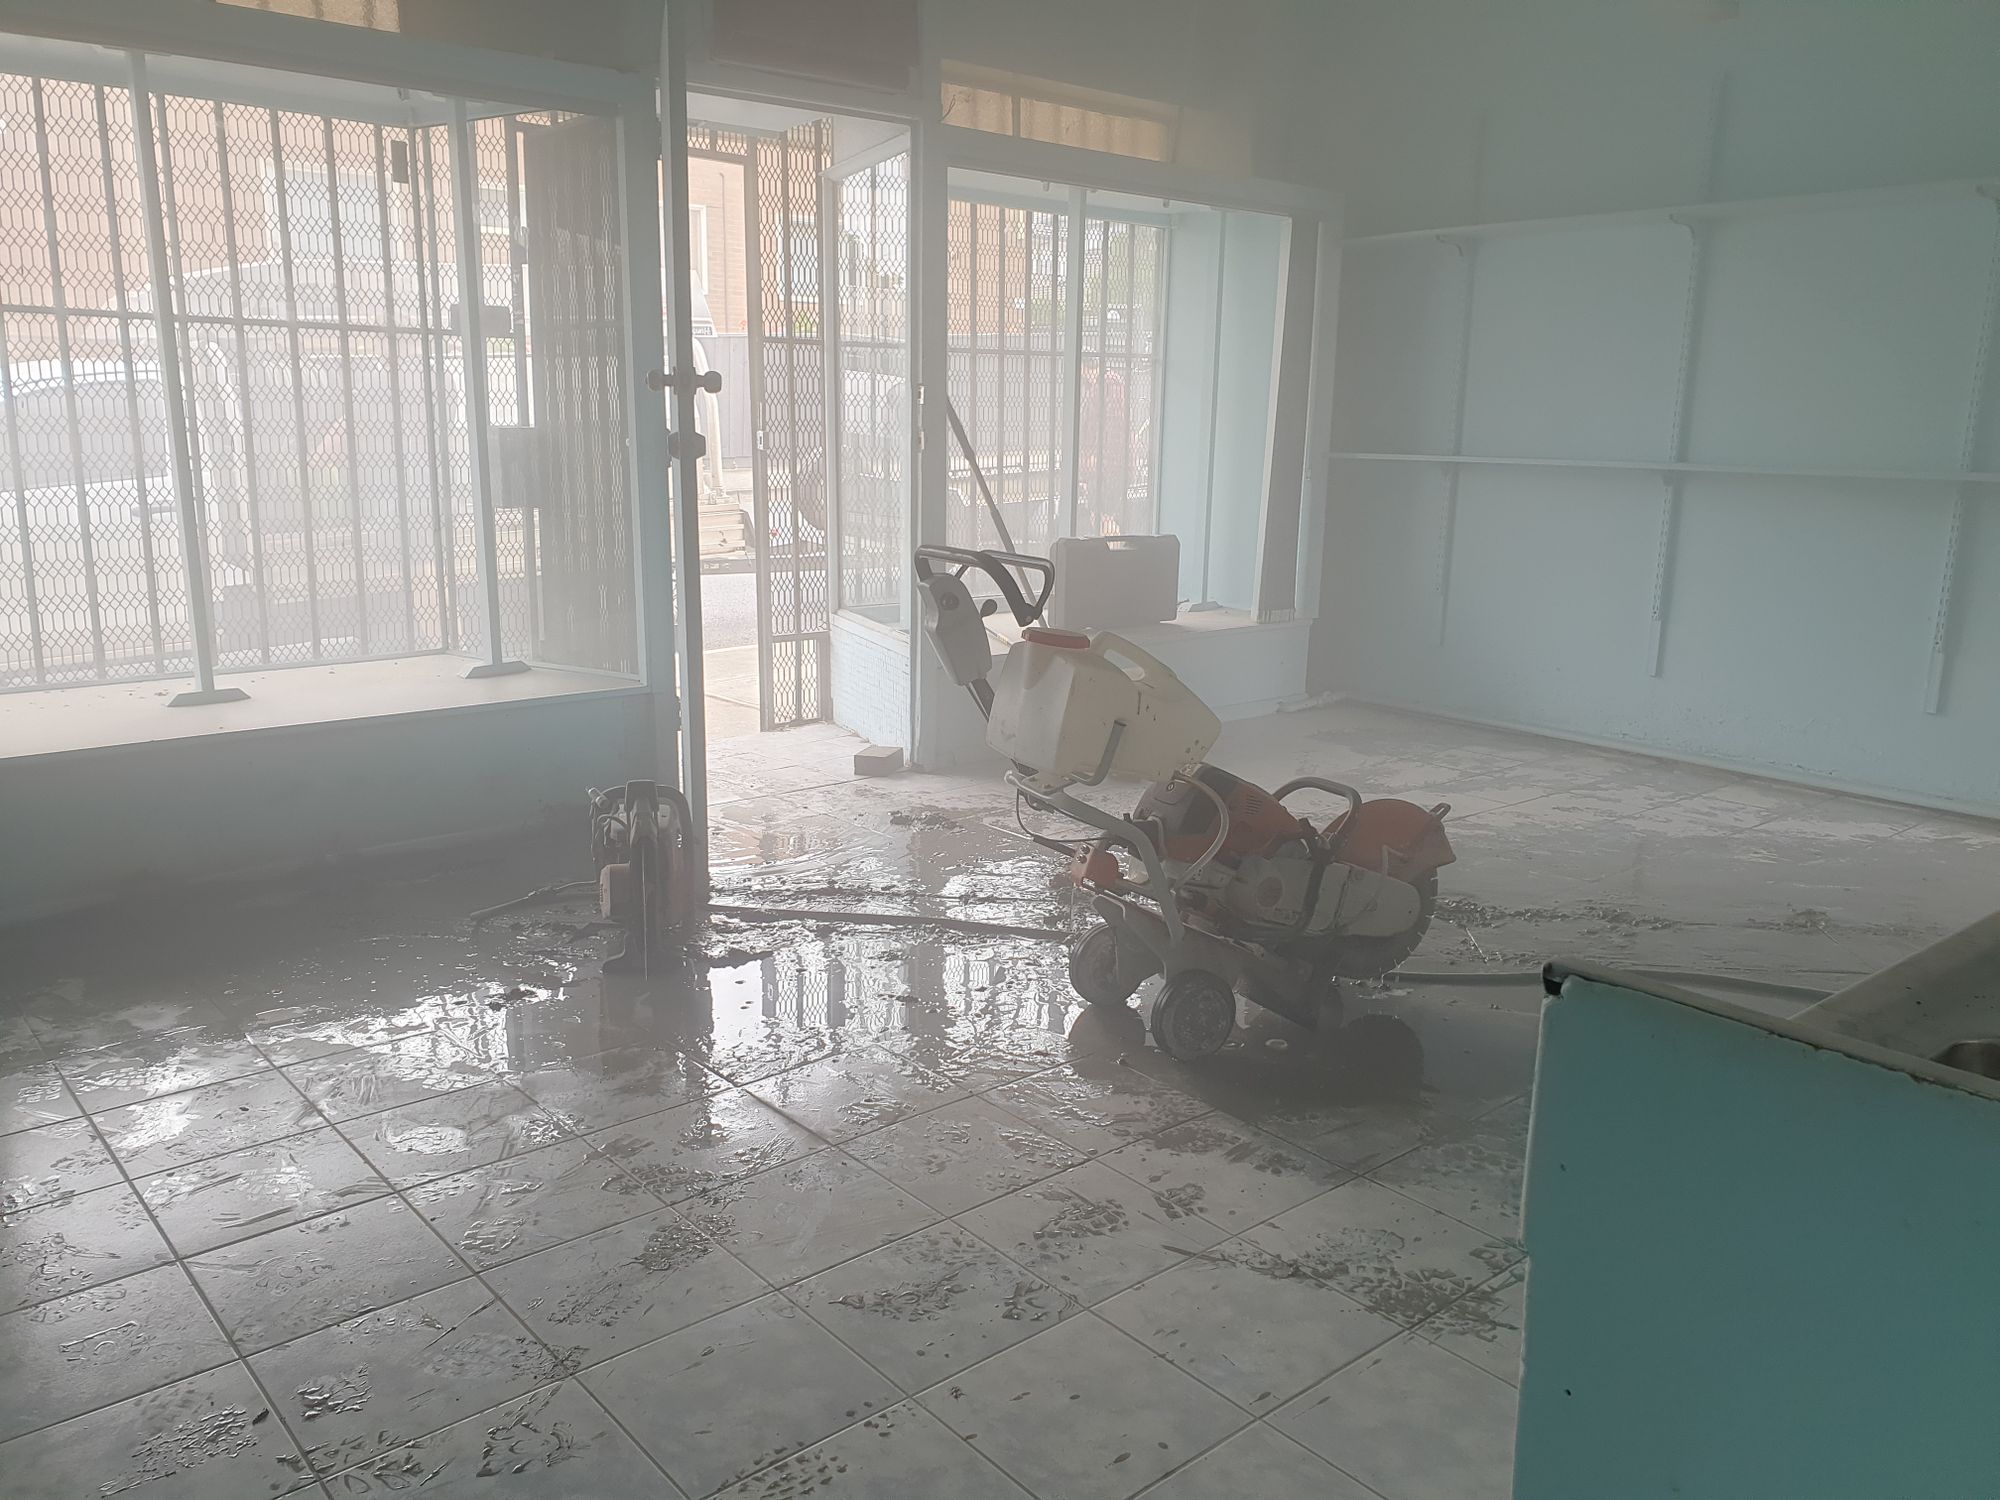 Concrete cutter in the middle of a room, a lot of dust in the air